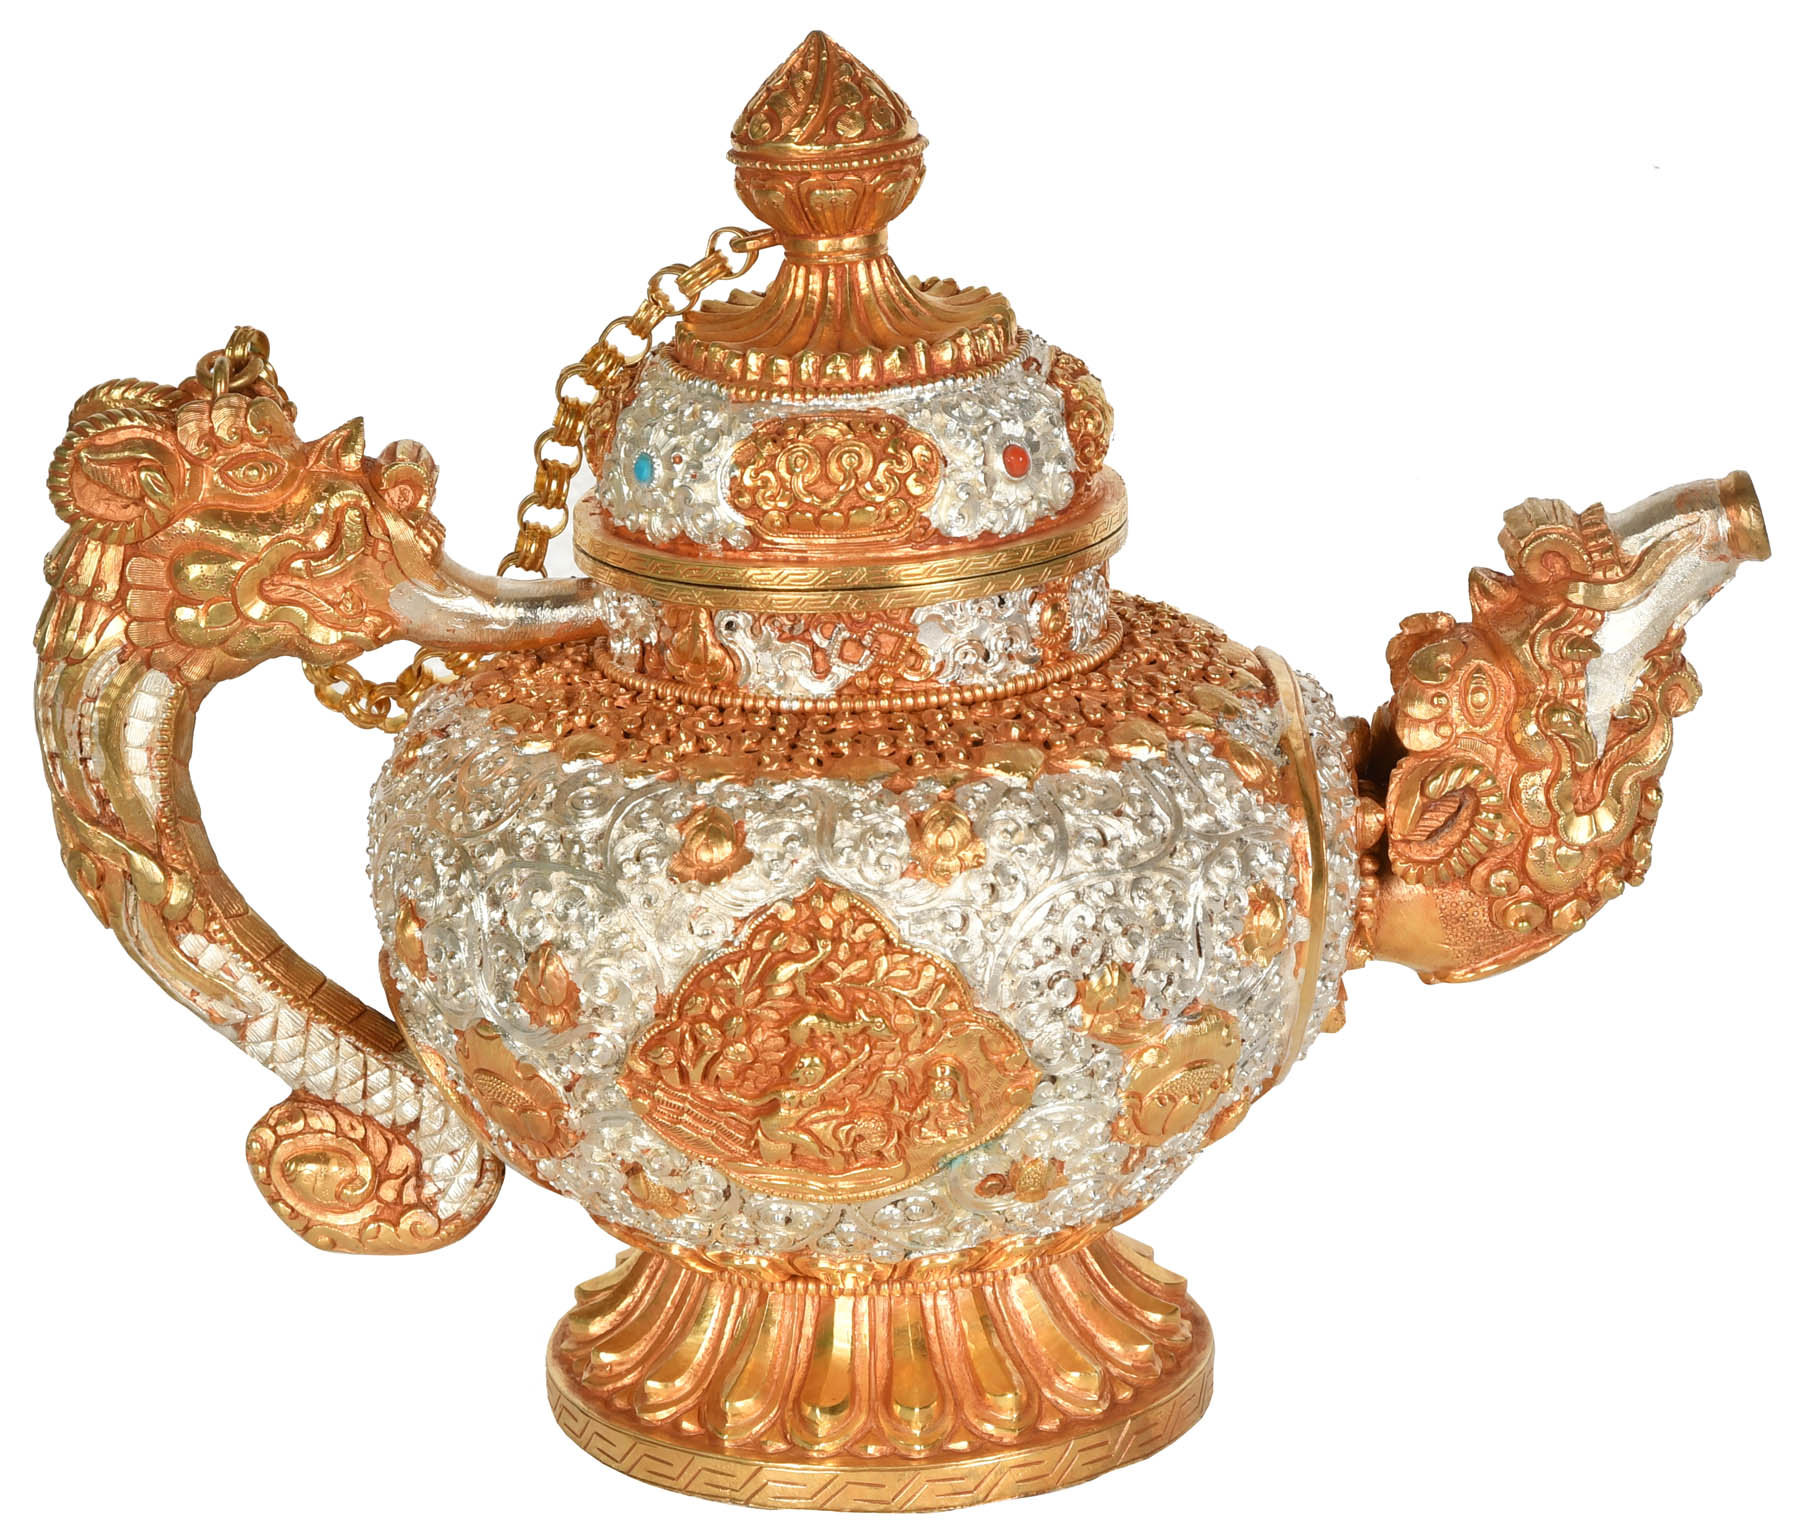 What is a samovar and how does it work? - Questions & Answers